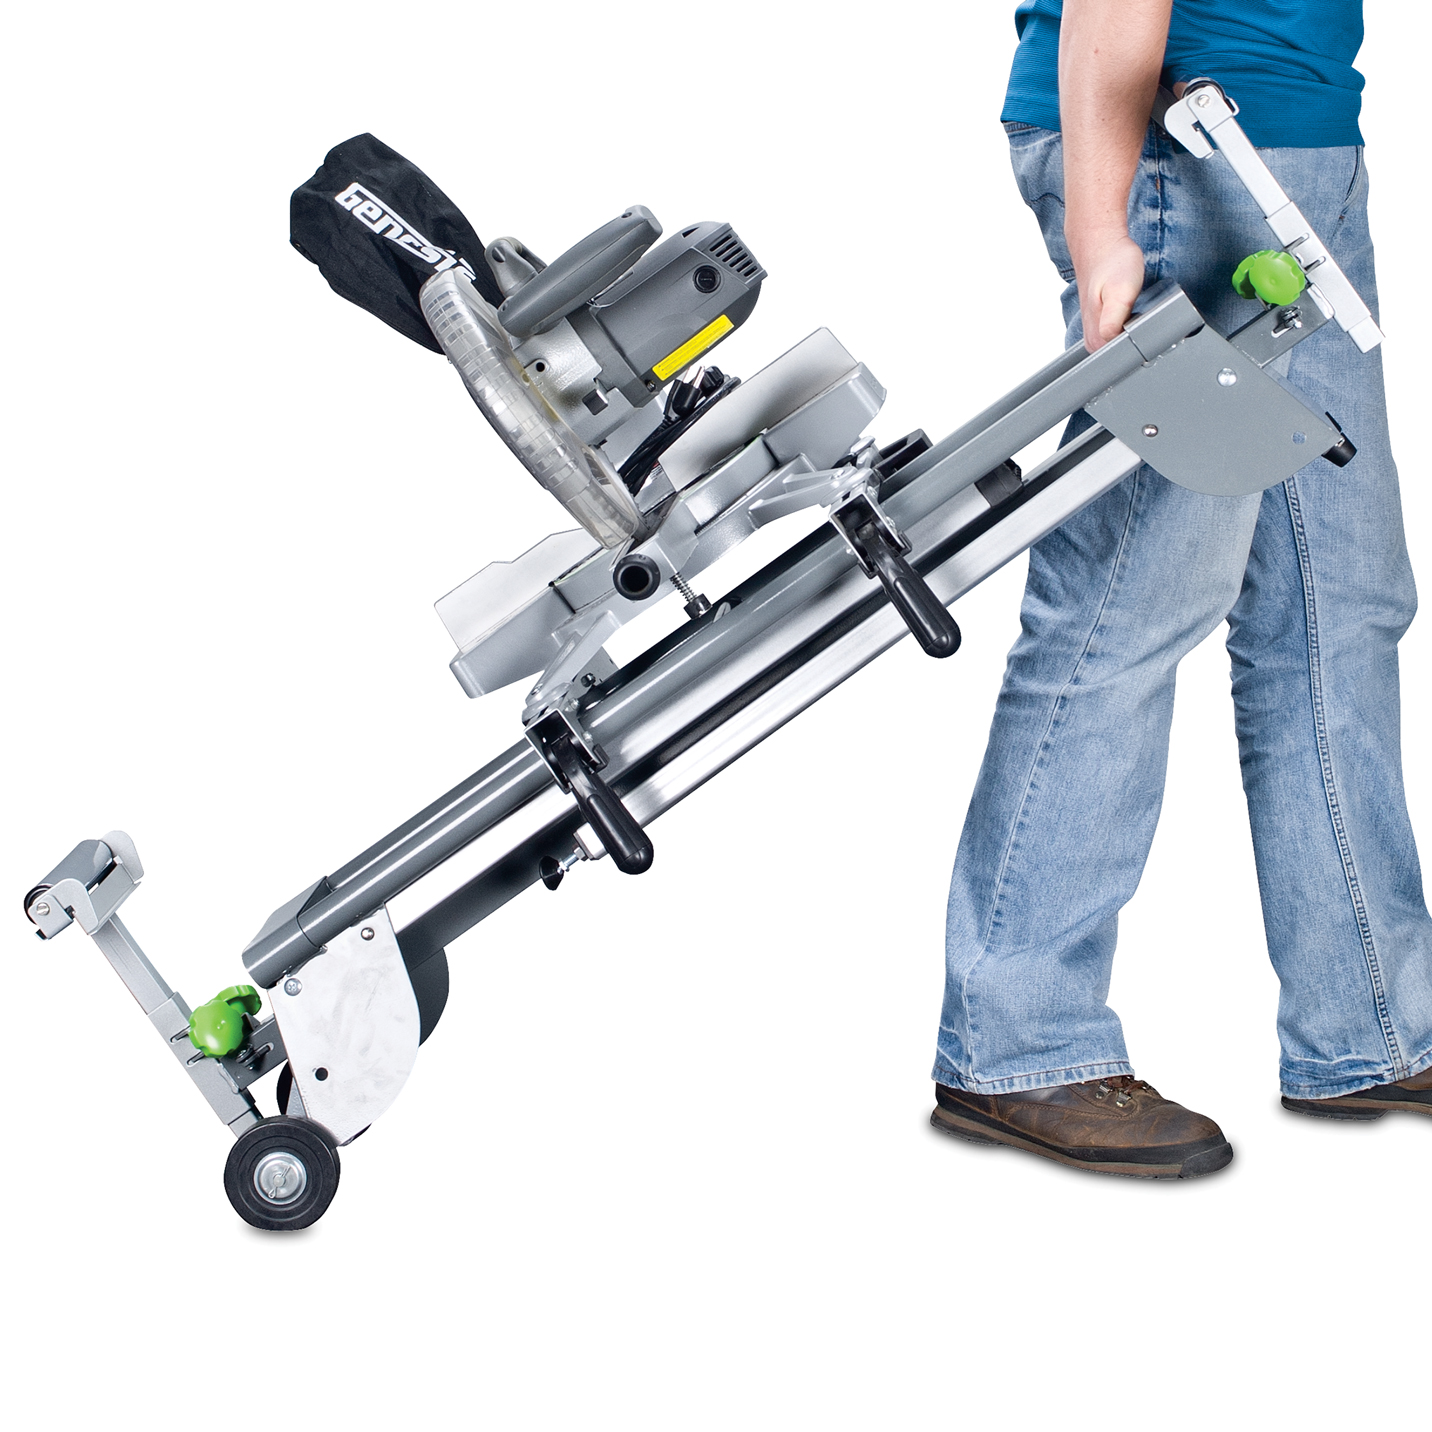 Bentism Planer Stand 100 lbs Heavy Loads 3-gear Height Saw Stand w/ 4 Casters, Size: 27.7 x 23.7 x 35.4 in / 70.3 × 60.3 × 90 cm, Black